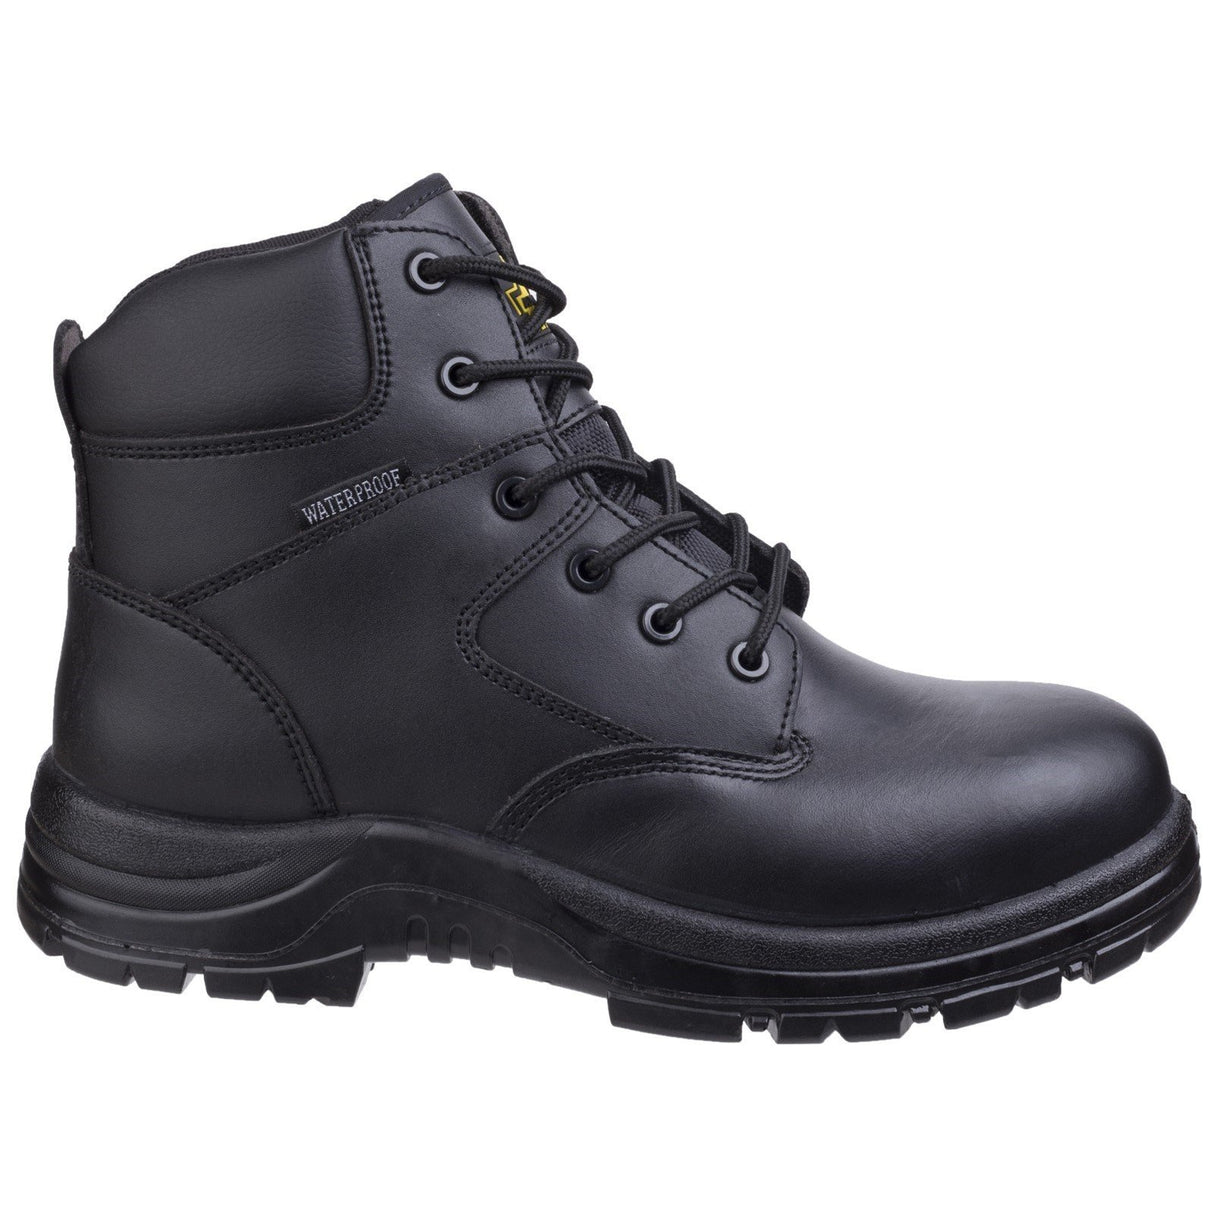 Amblers Safety Metal Free Waterproof Lace Up Safety Boots